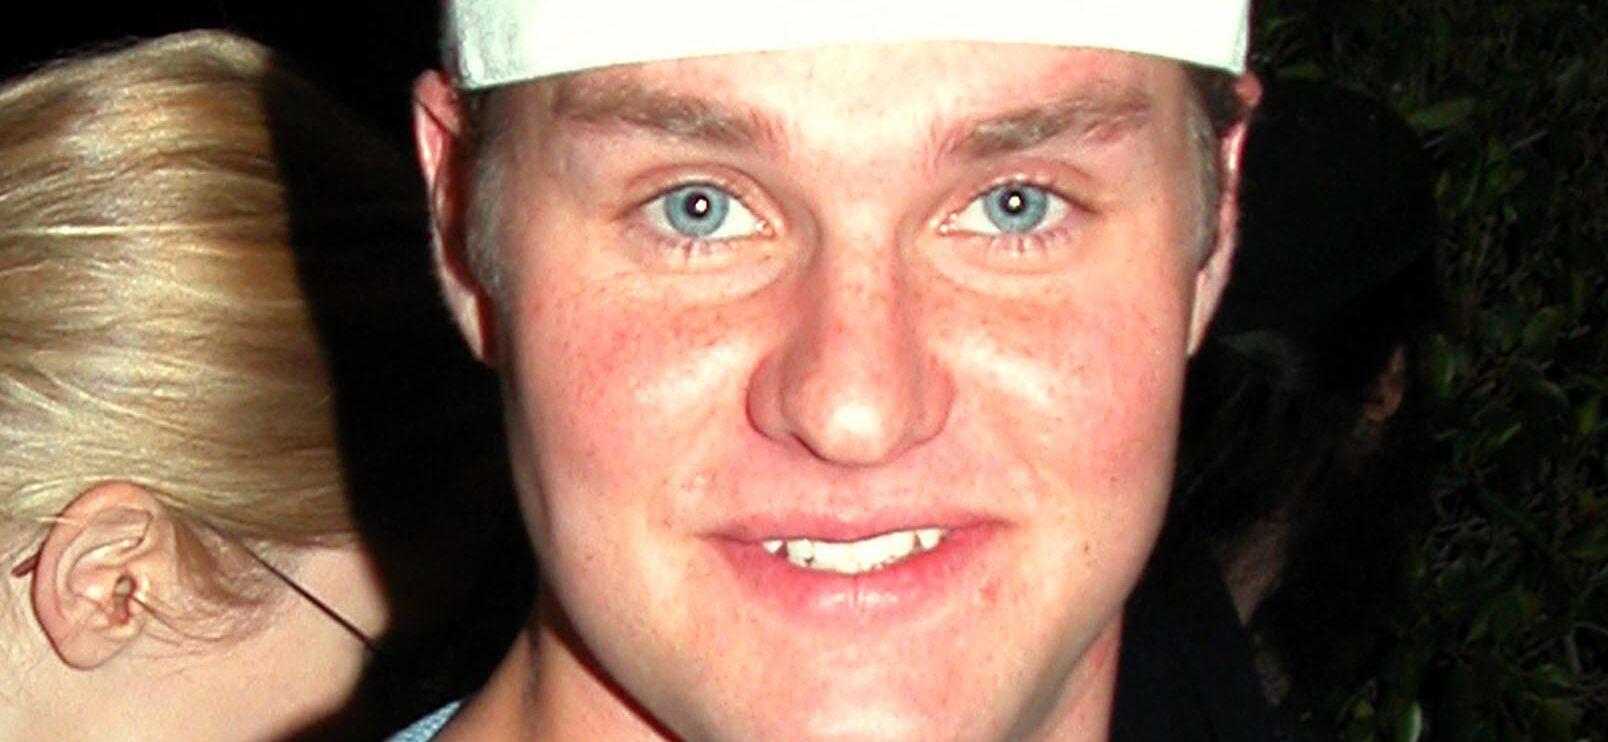 ‘Home Improvement’ Star Zachery Ty Bryan Arrested For Alleged DUI